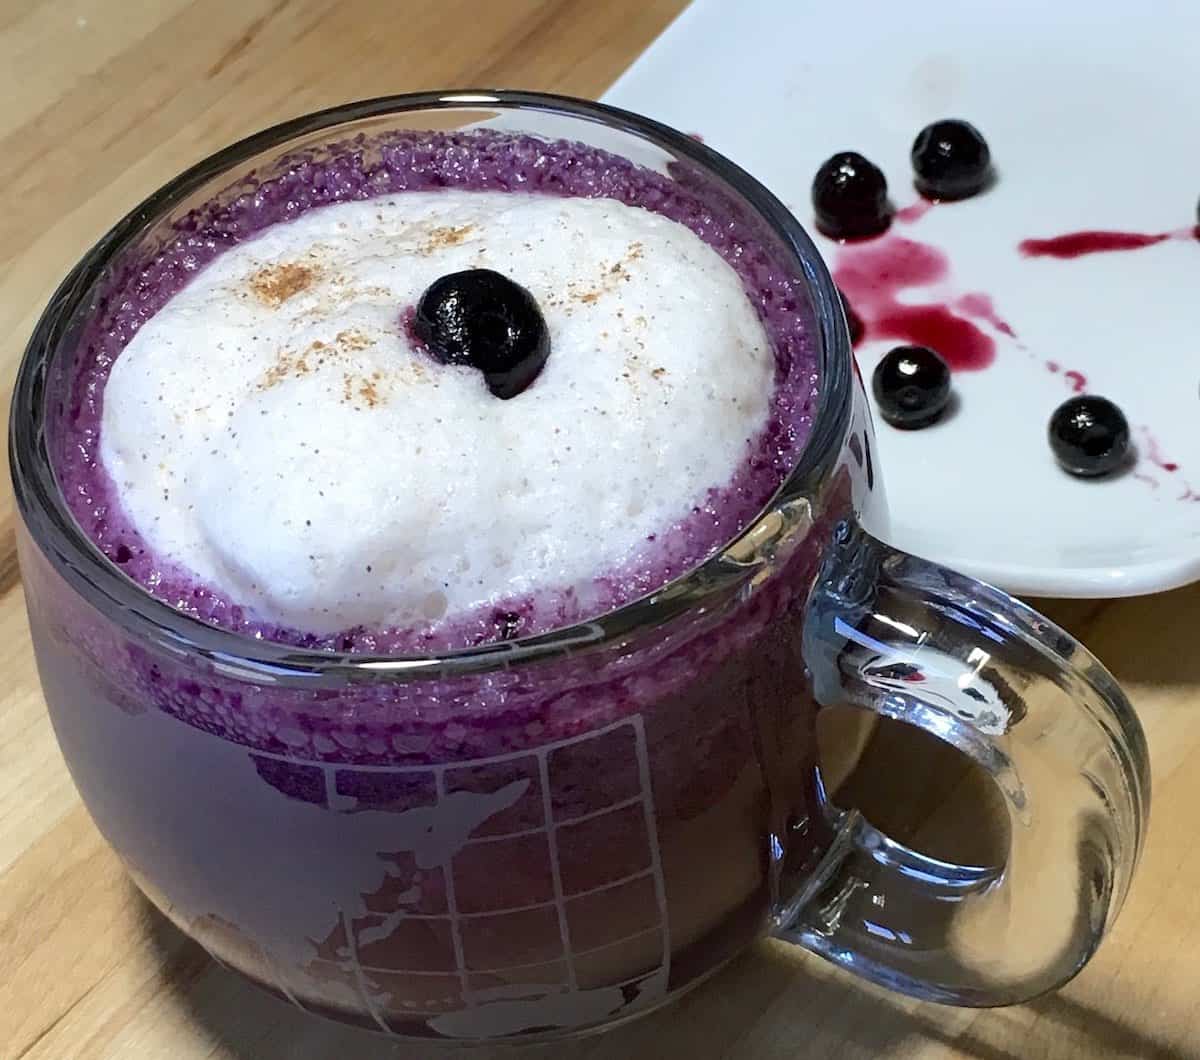 Blueberry latte with wild blueberries.